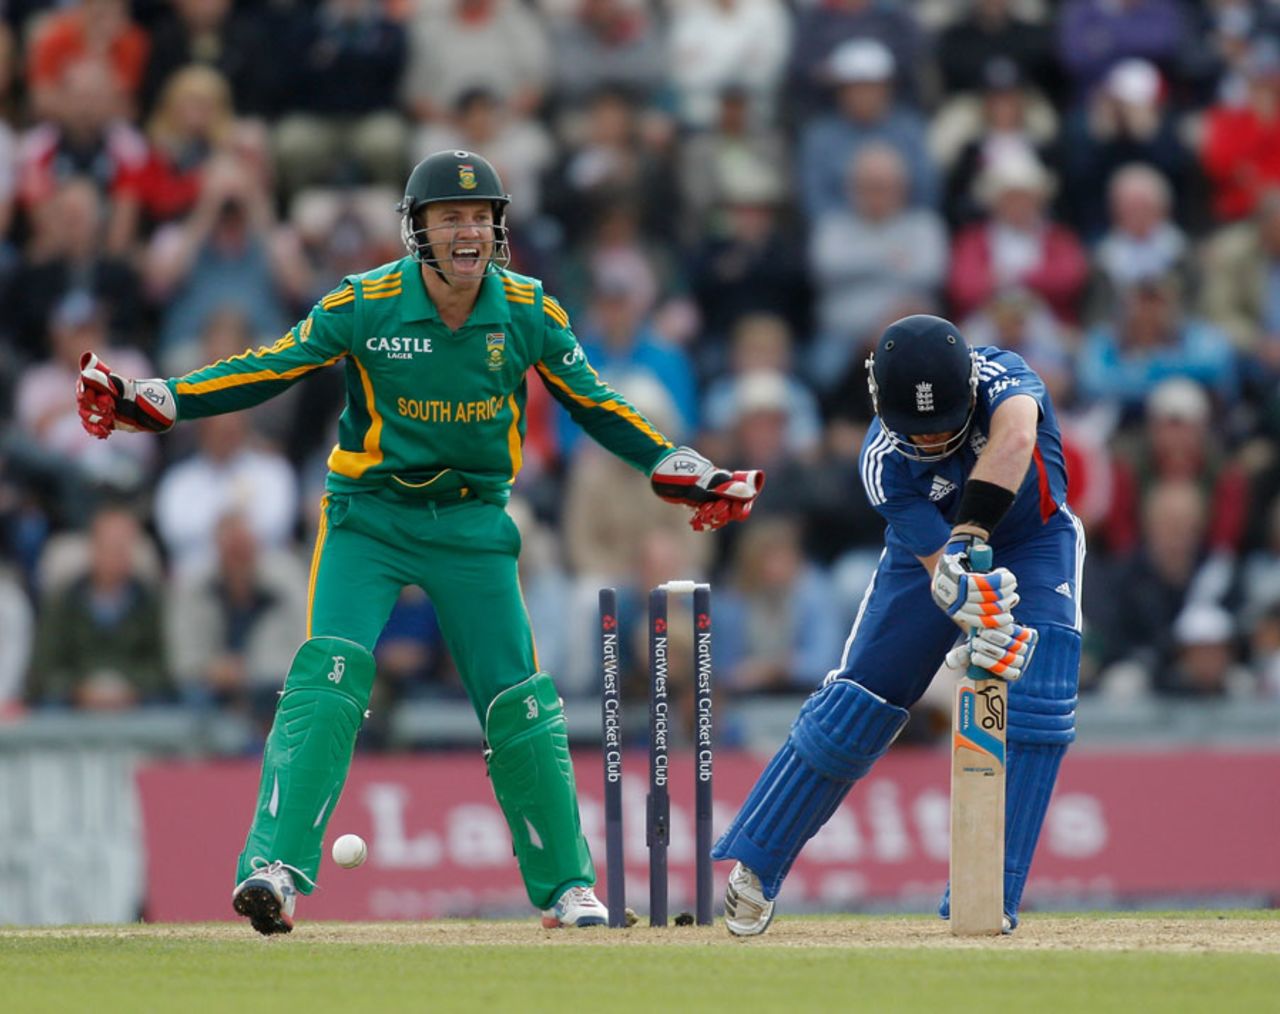 Ian Bell was bowled by a Robin Peterson turner, England v South Africa, 2nd NatWest ODI, West End, August 28, 2012